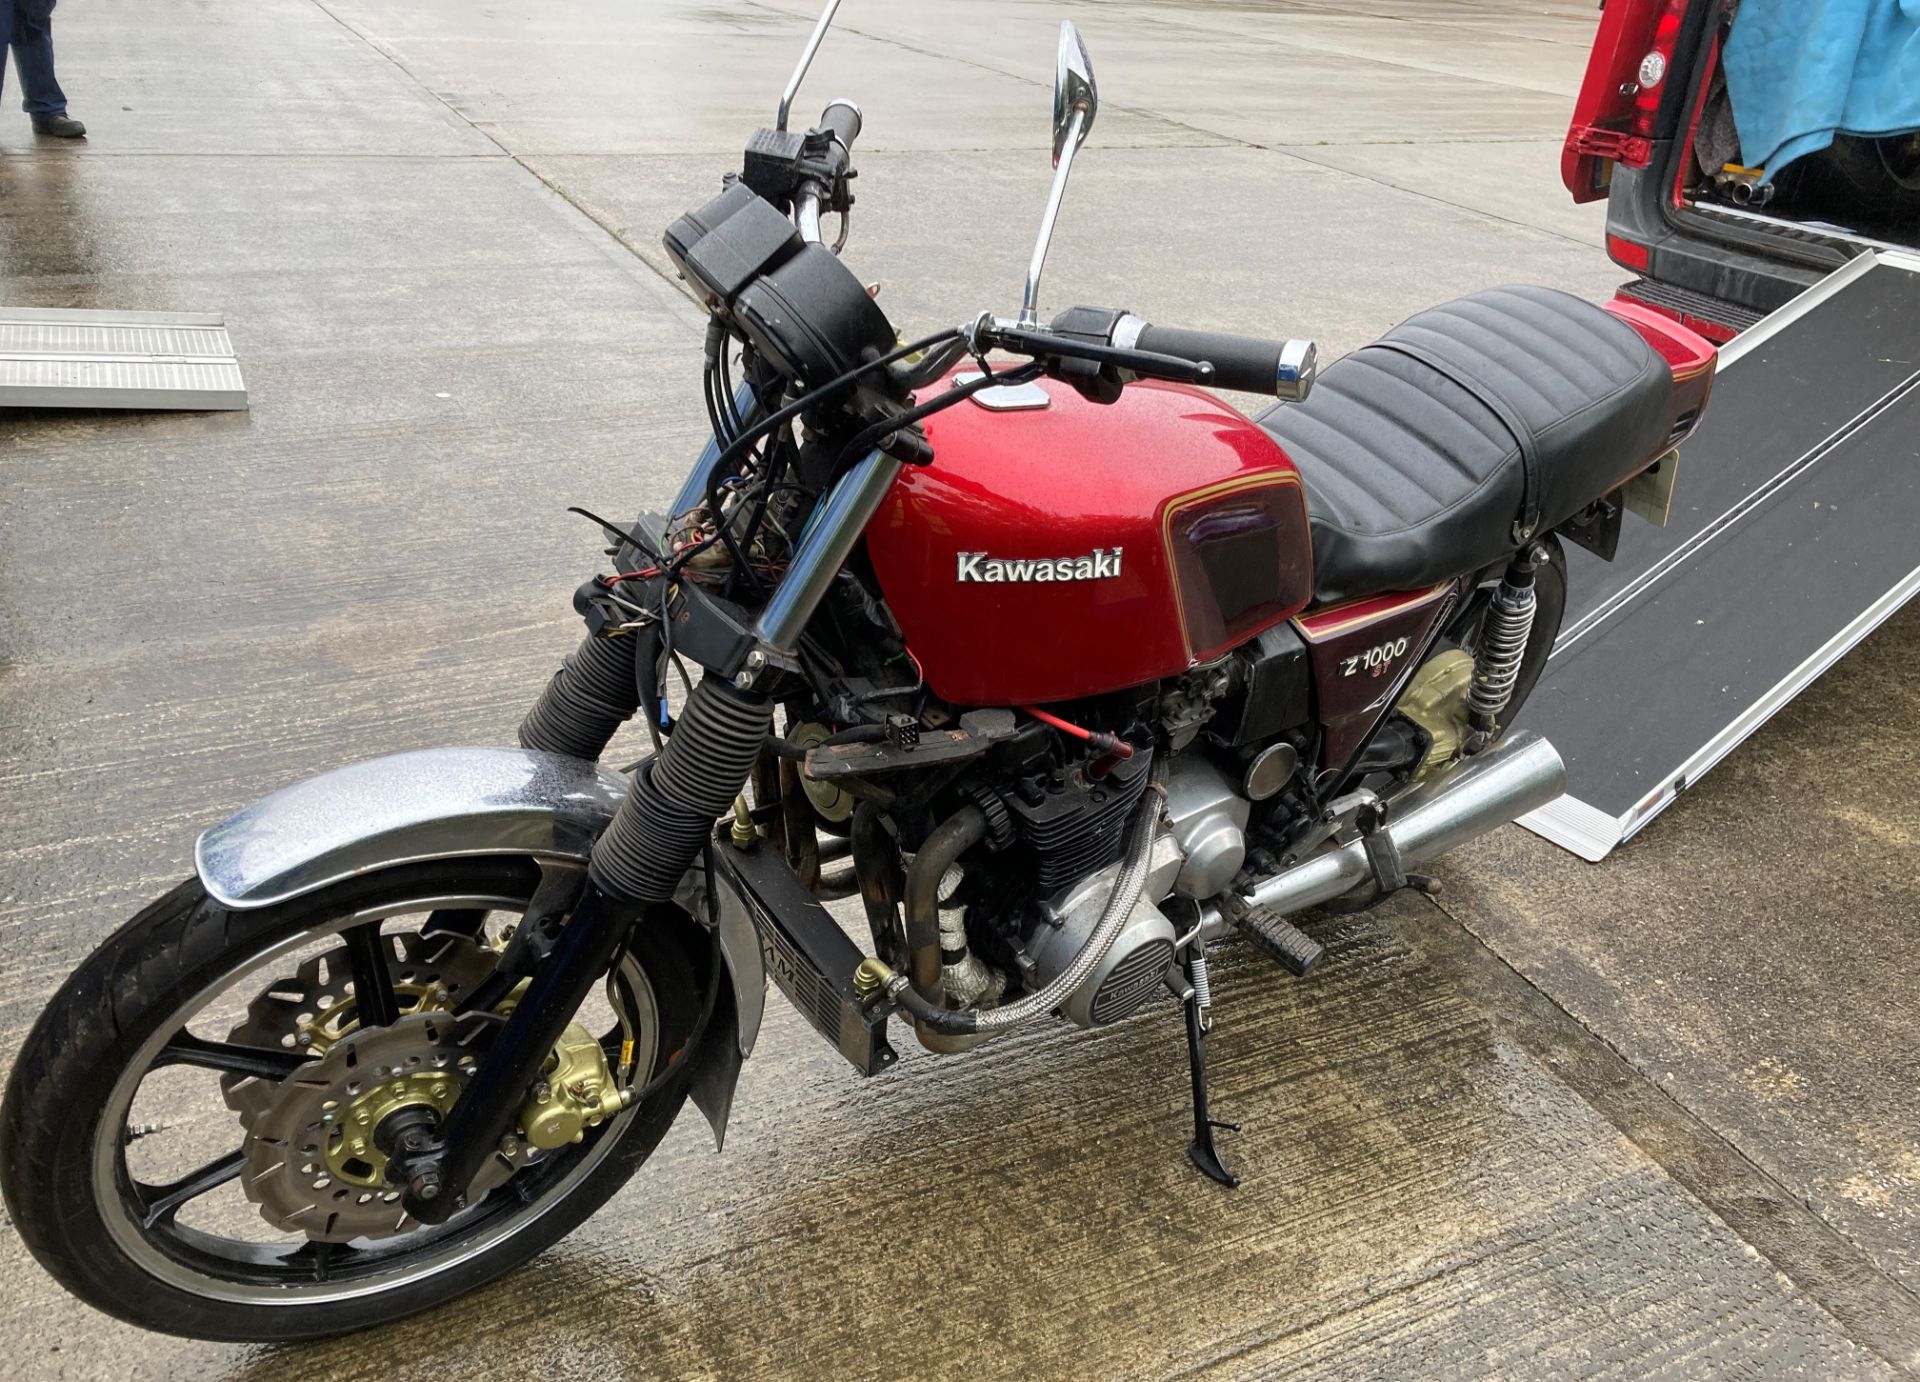 KAWASAKI 1015cc MOTORCYCLE - Petrol - Red. Sold as a project restoration/spares/repairs. - Image 2 of 11